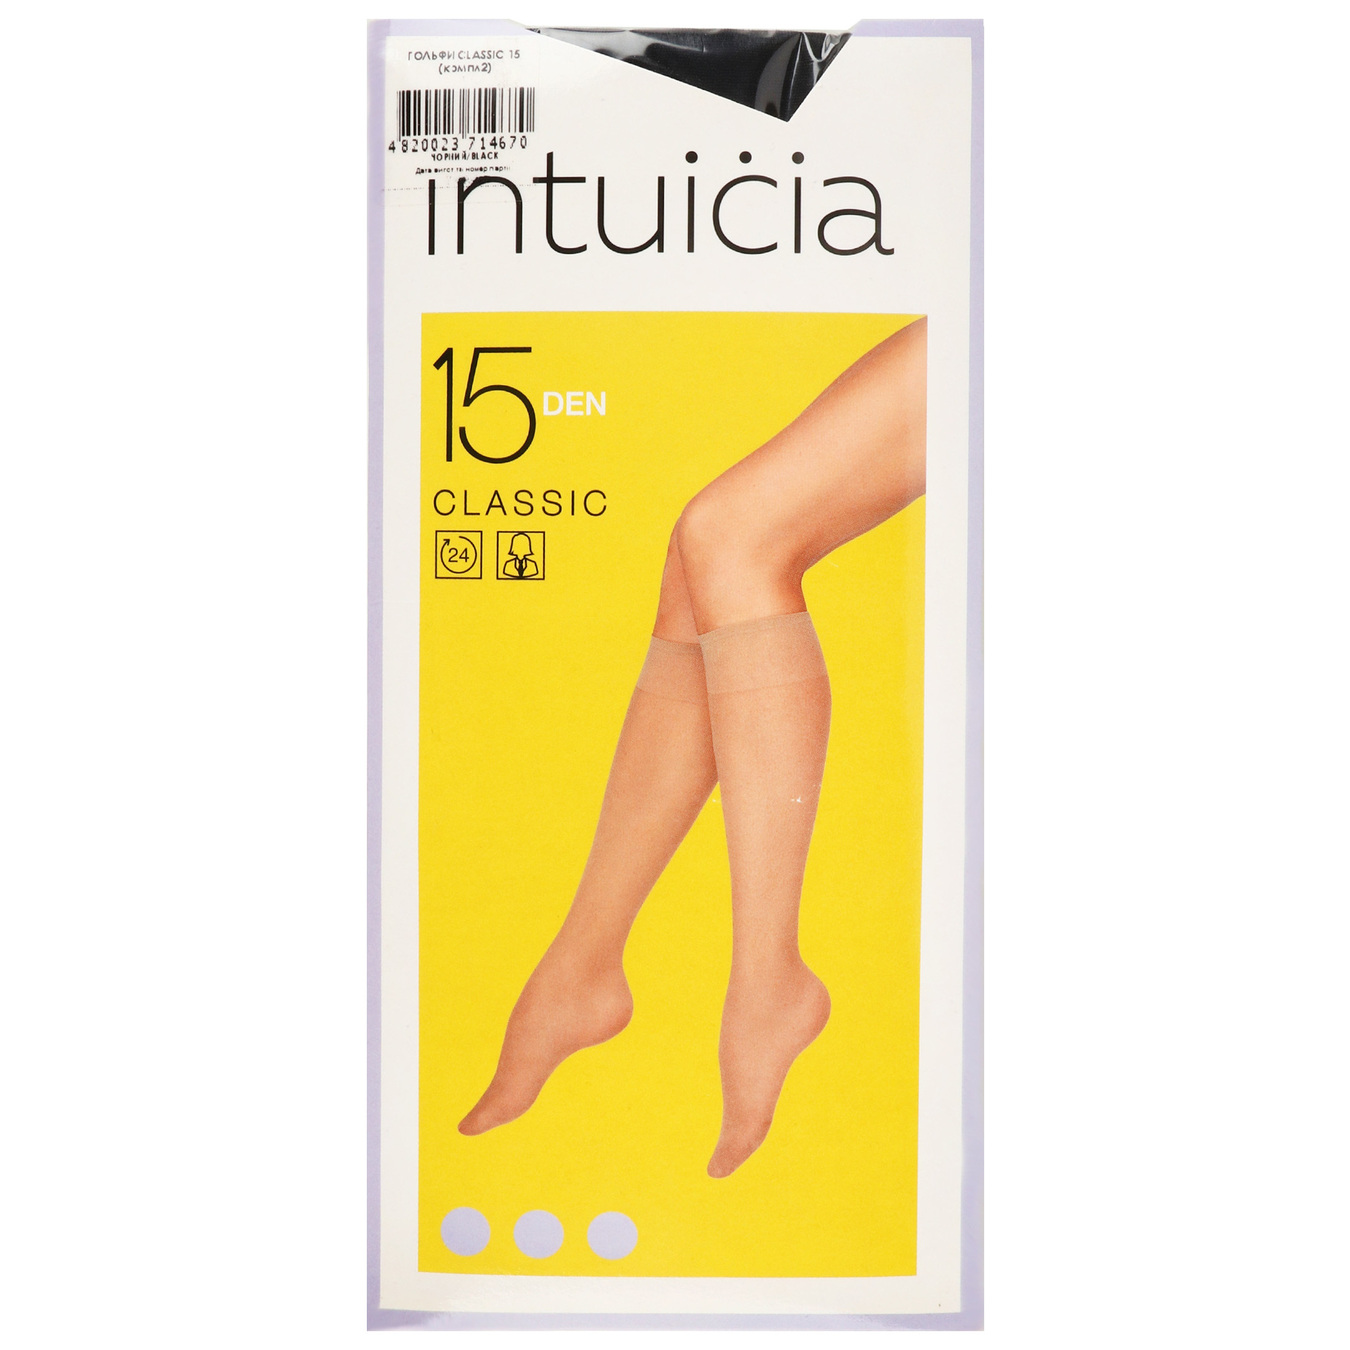 Tights, stockings - Clothes and shoes fast delivery from NOVUS